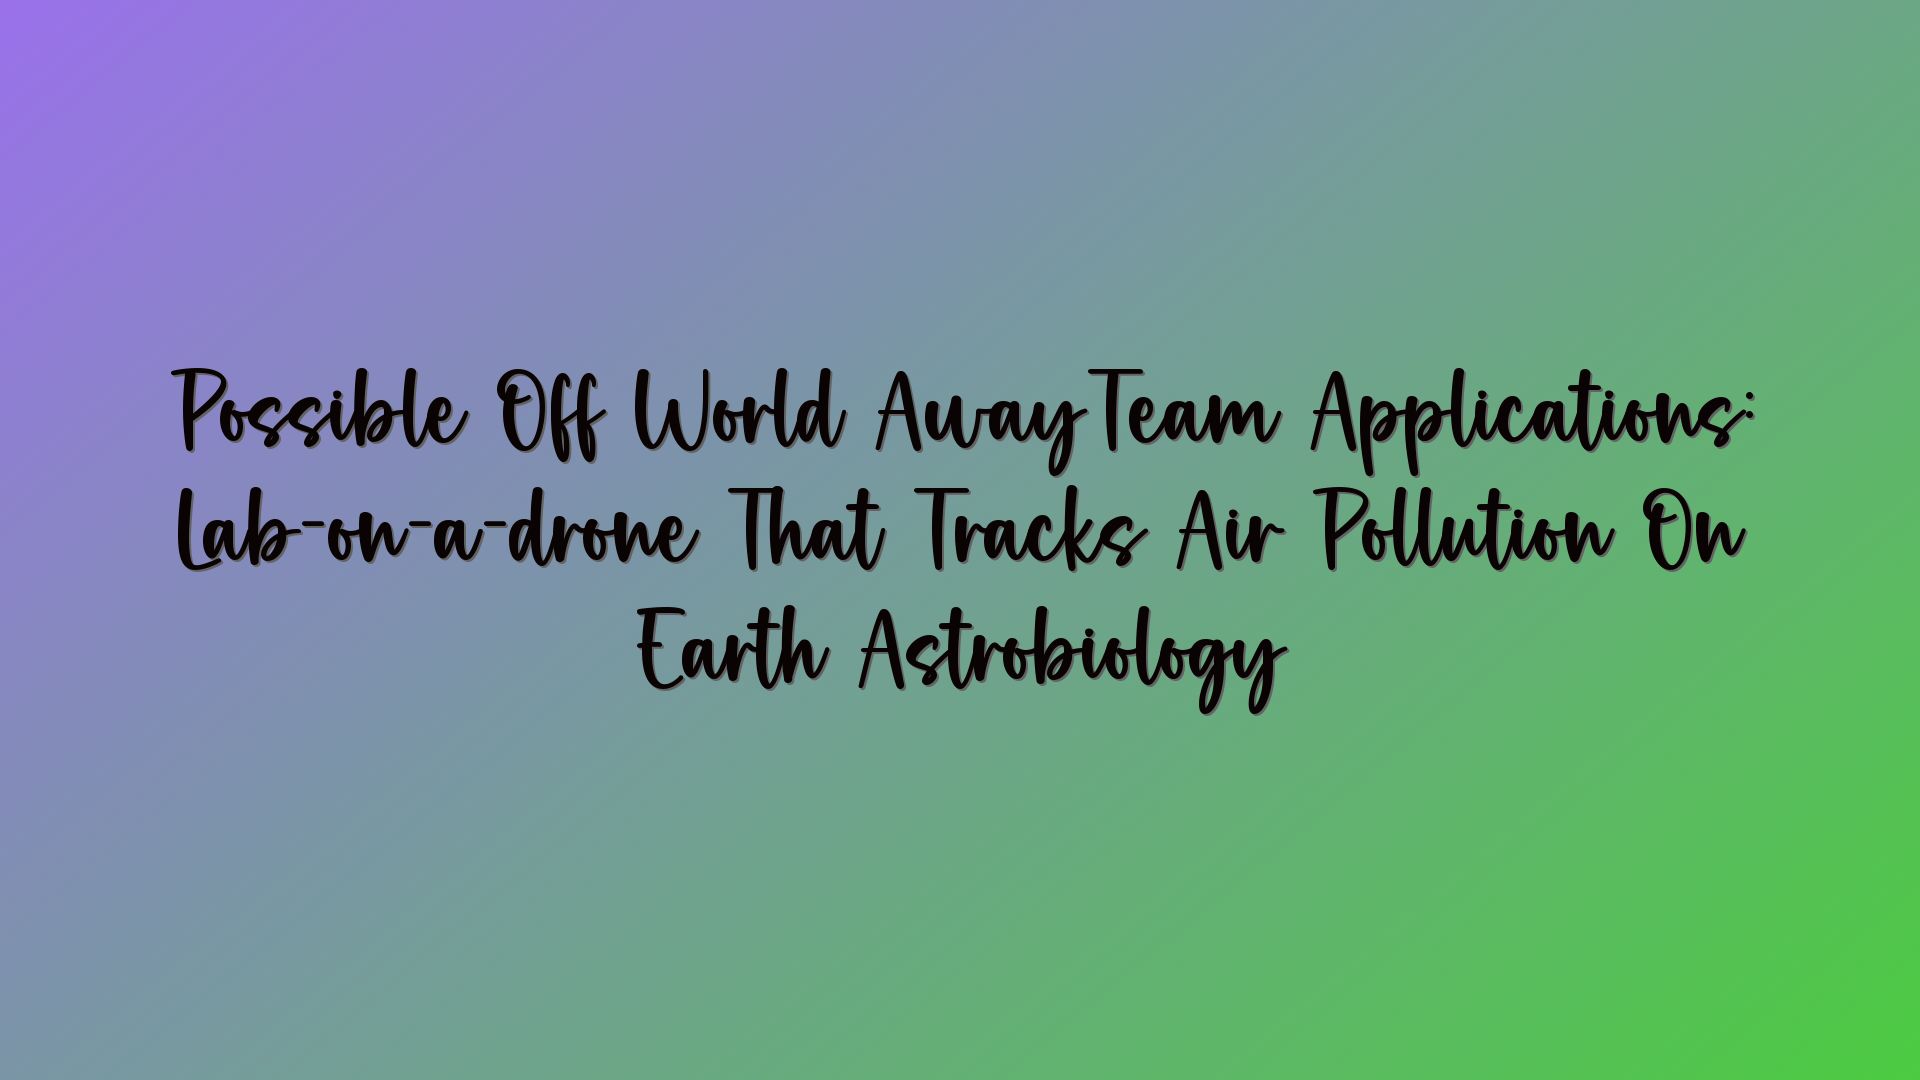 Possible Off World AwayTeam Applications: Lab-on-a-drone That Tracks Air Pollution On Earth Astrobiology